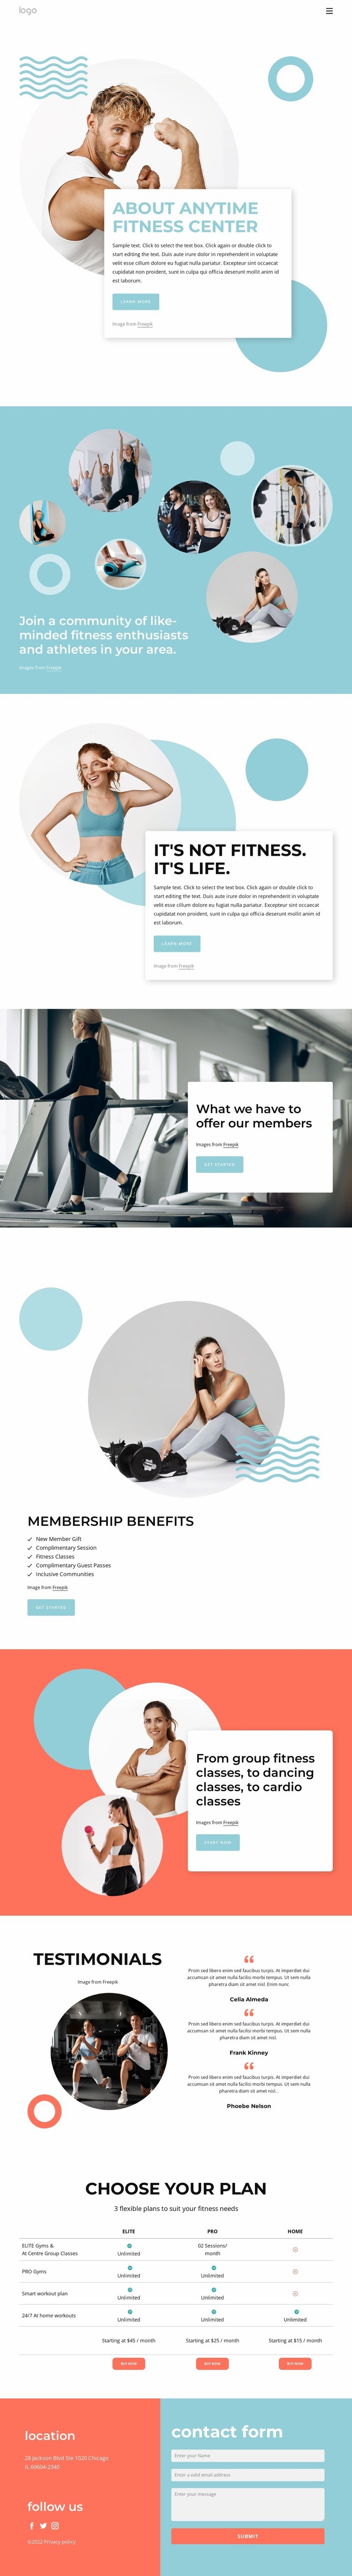 About Anytime fitness center Elementor Template Alternative